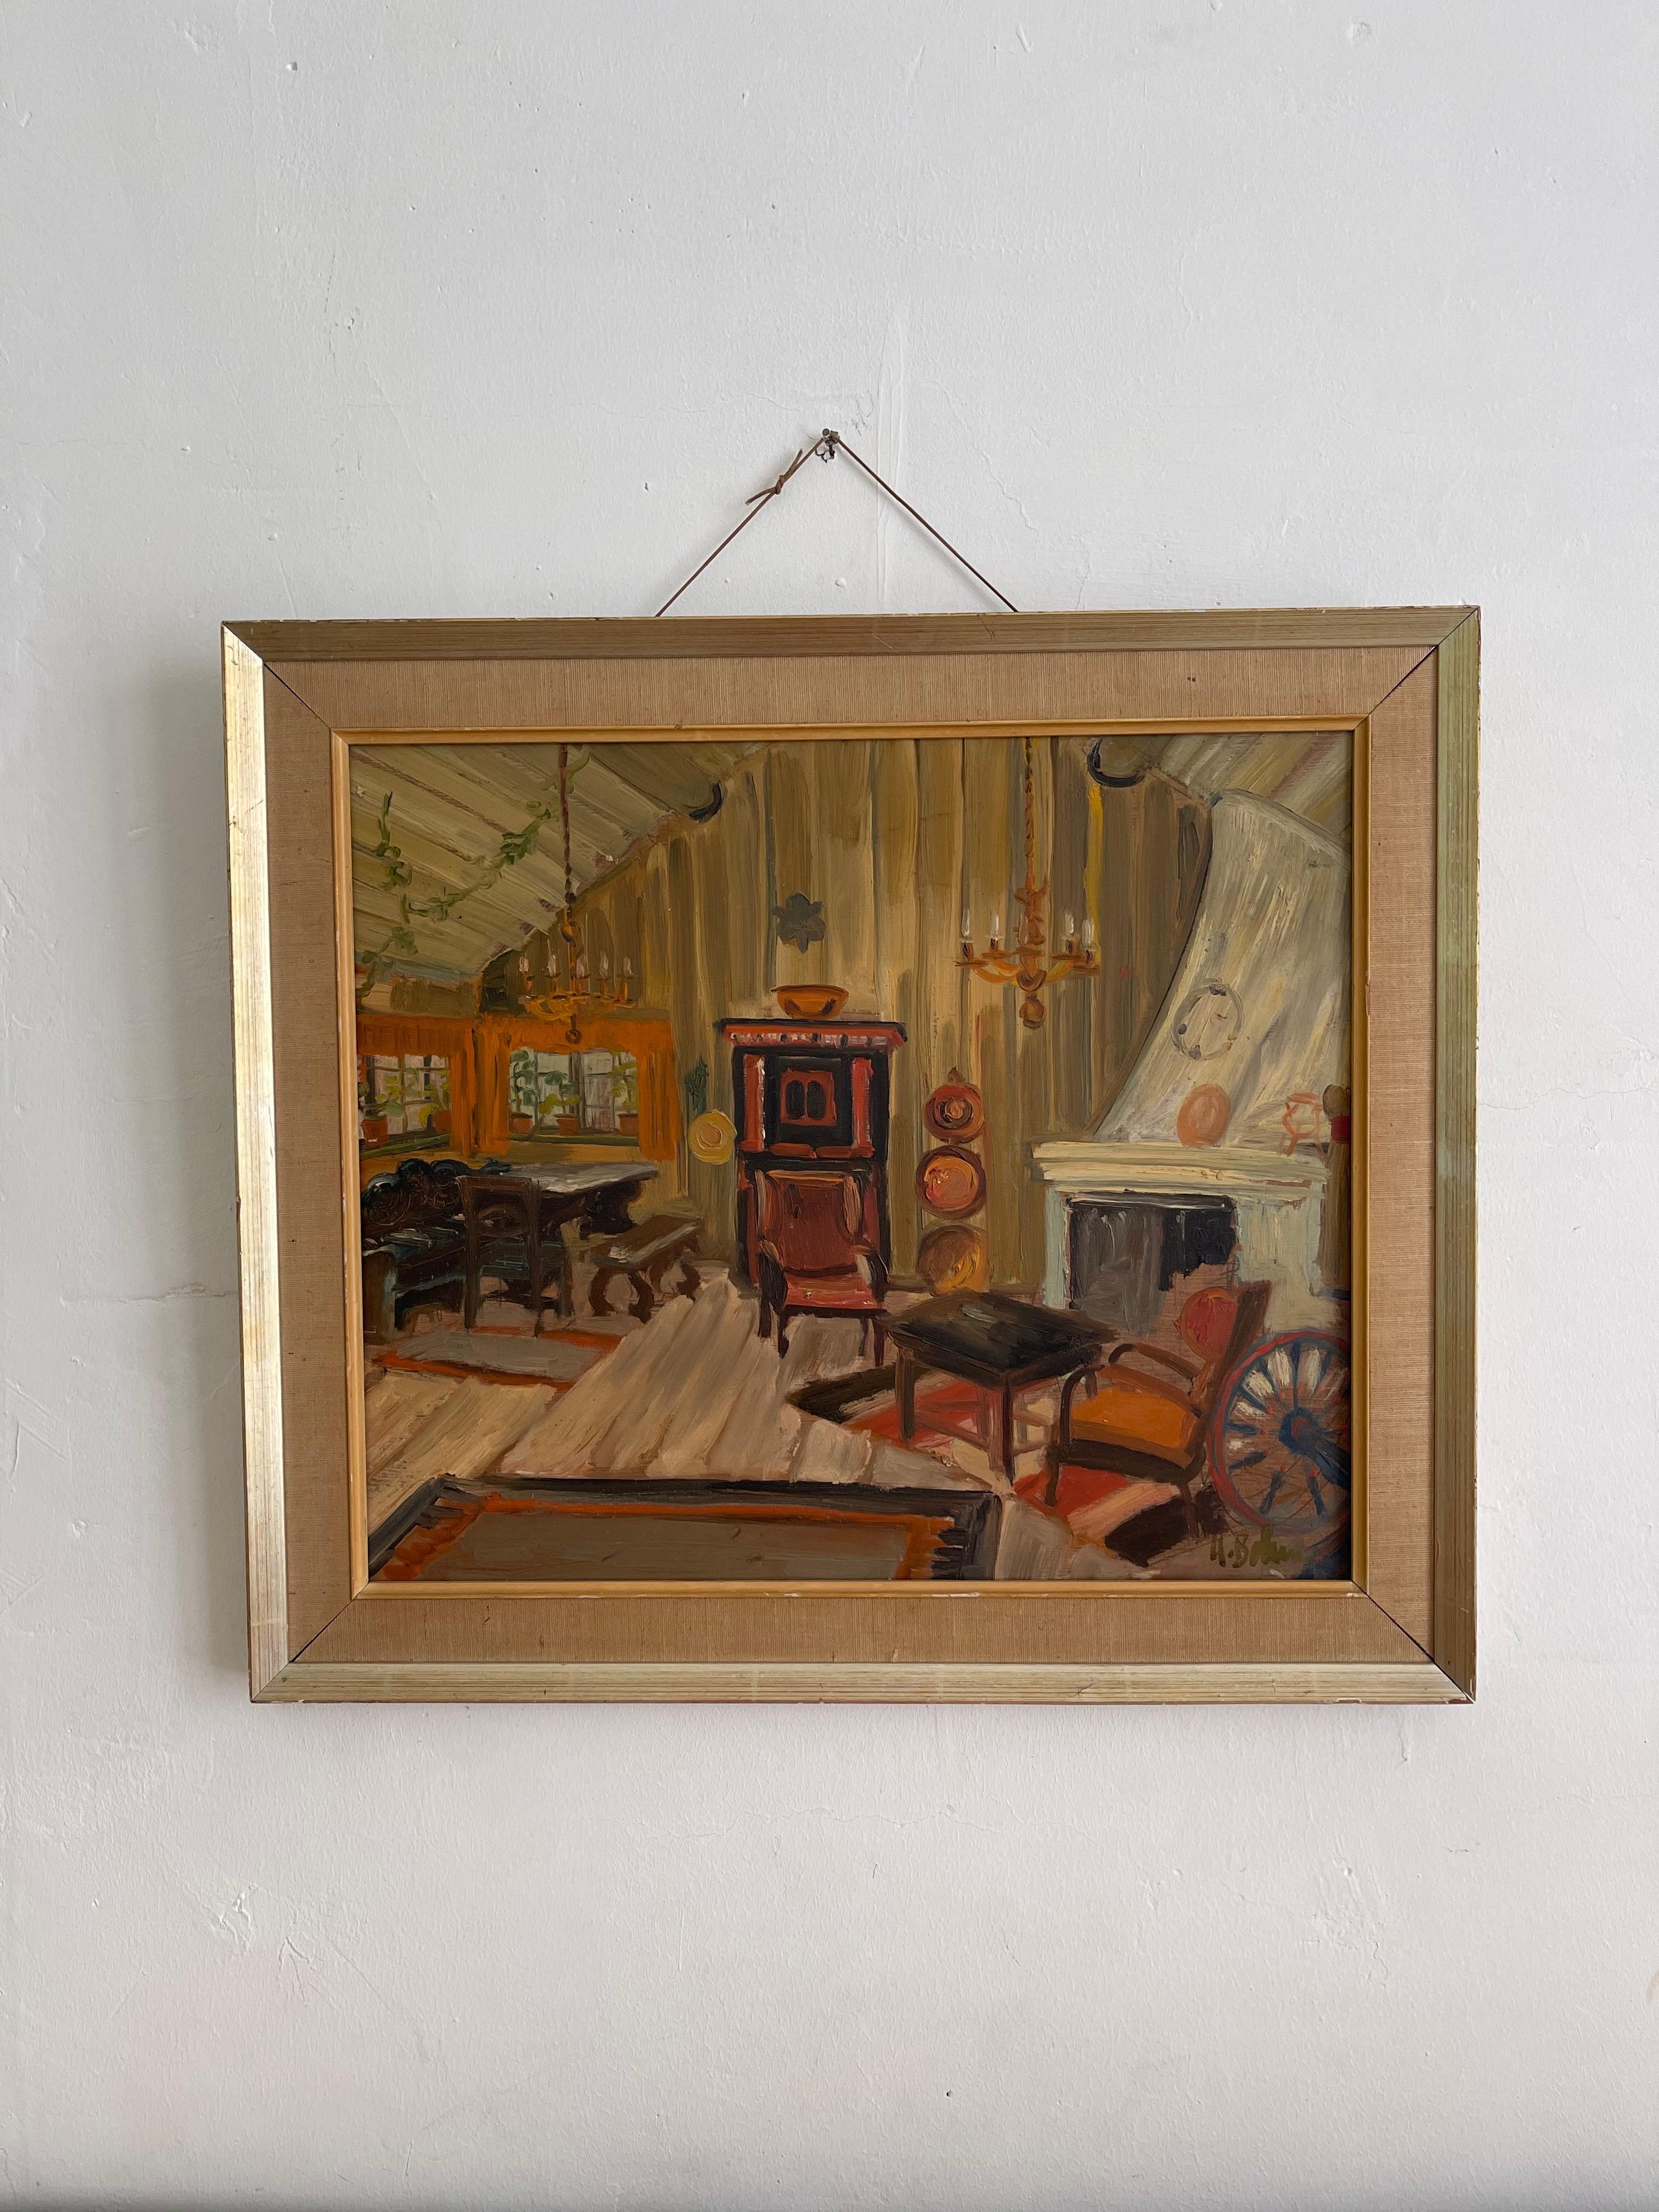 This Swedish painting by a recognised artist Hanna Bundin still life / modernist.

About the Artist

Hanna Brundin (1914- 2000) was a Swedish artist .

Brundin studied at the Skåne painting school and for Harald Isenstein and Helge Nielsen at the